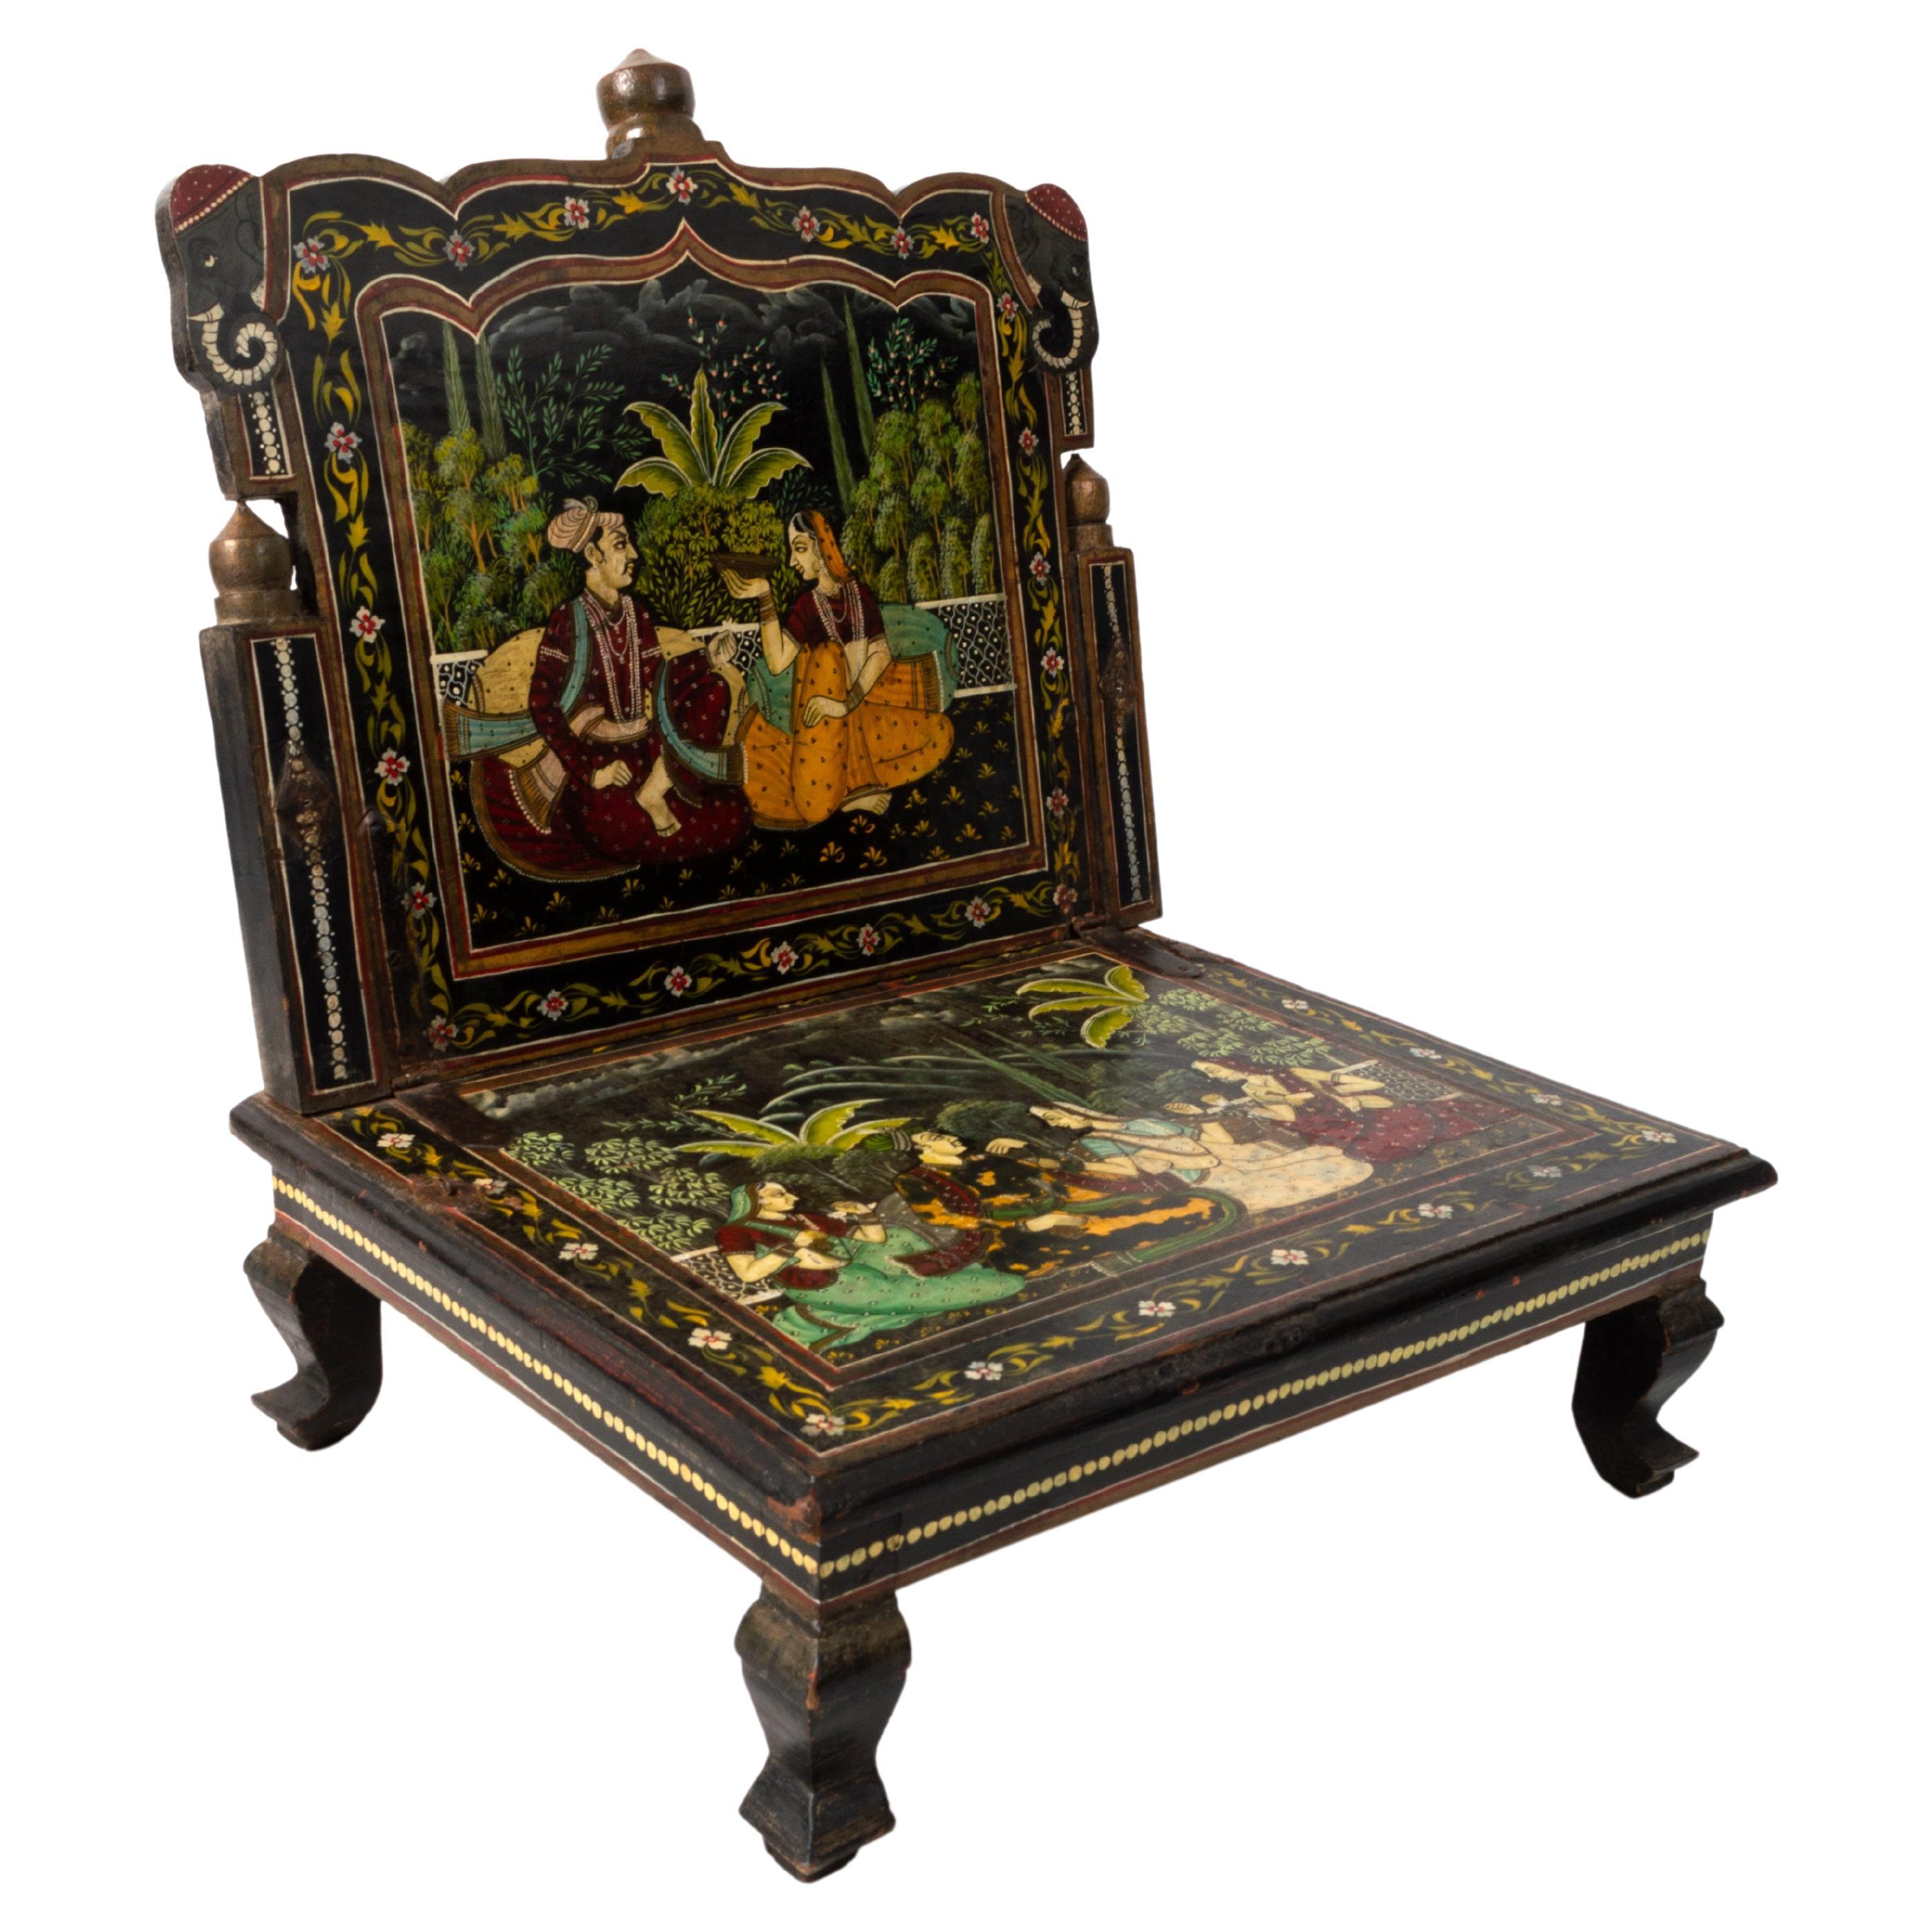 Antique Anglo-Indian Rajasthani Painted Mughal Scene Folding Chair For Sale